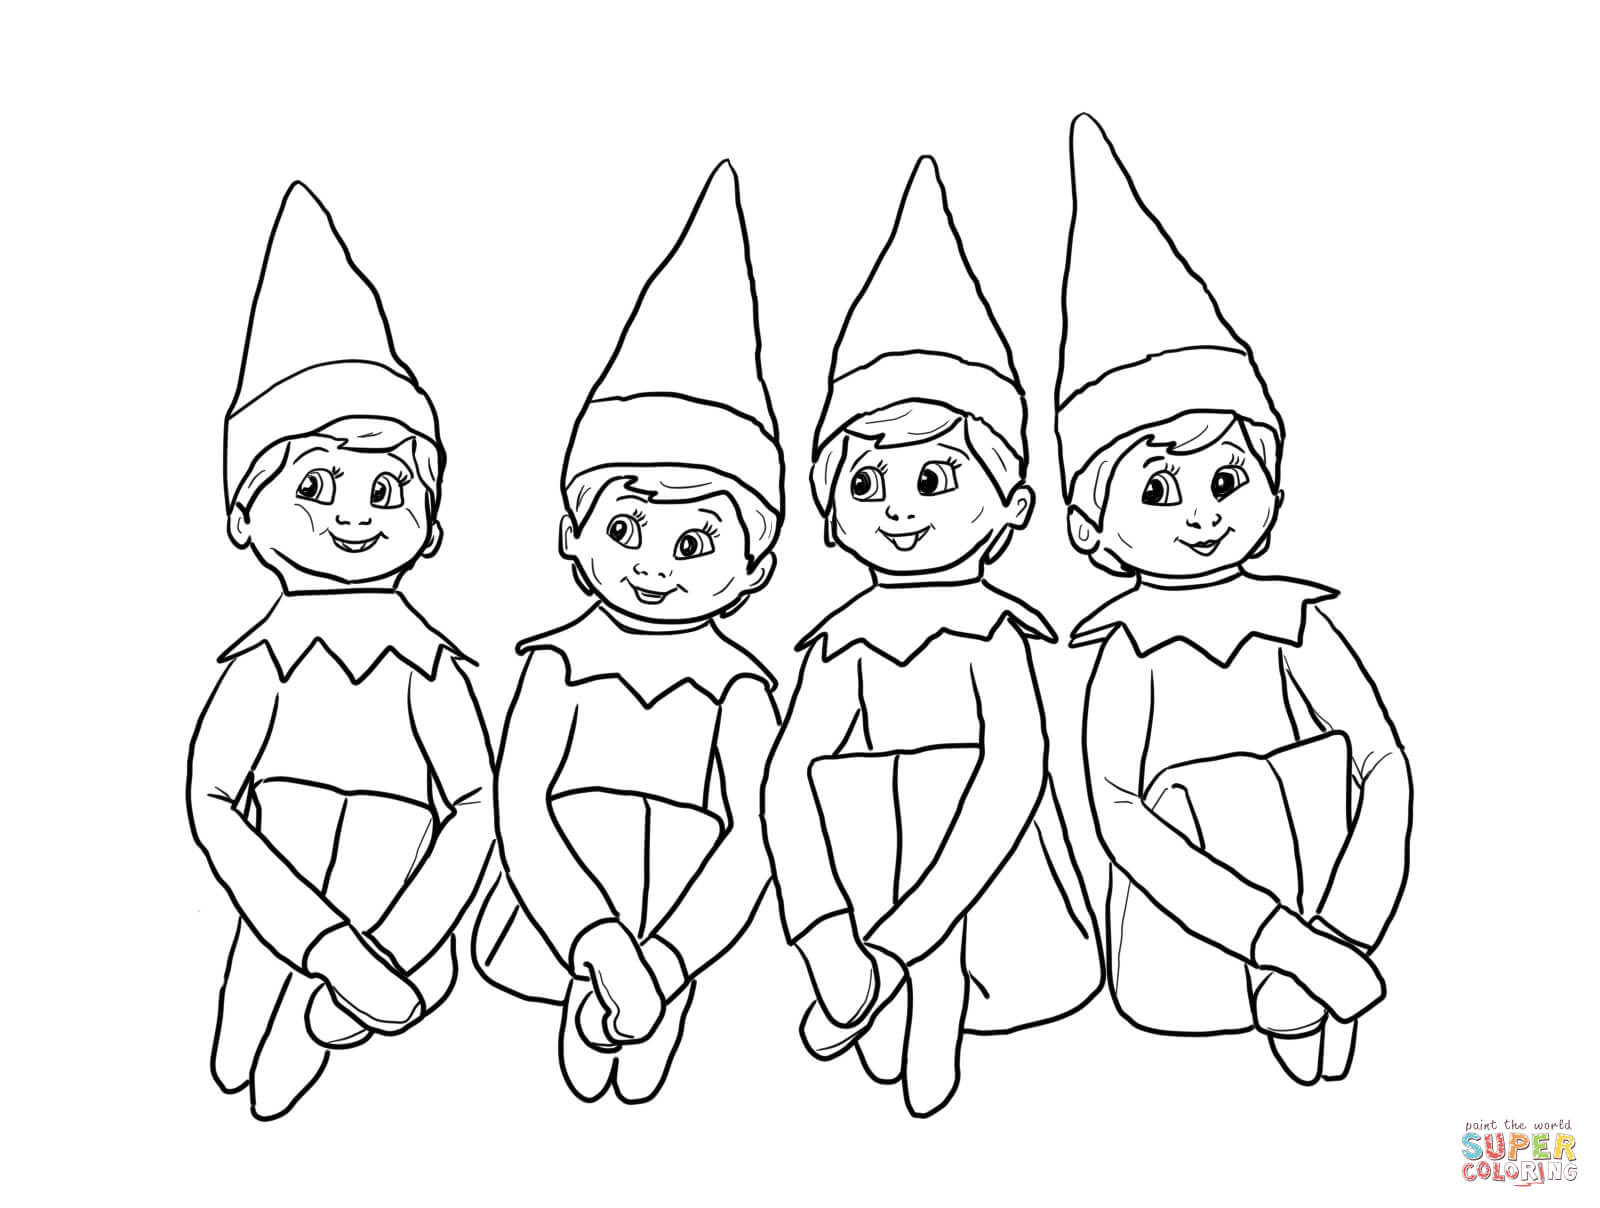 Coloring Pages: Elves On The Shelf Coloring Page Free Printable ...